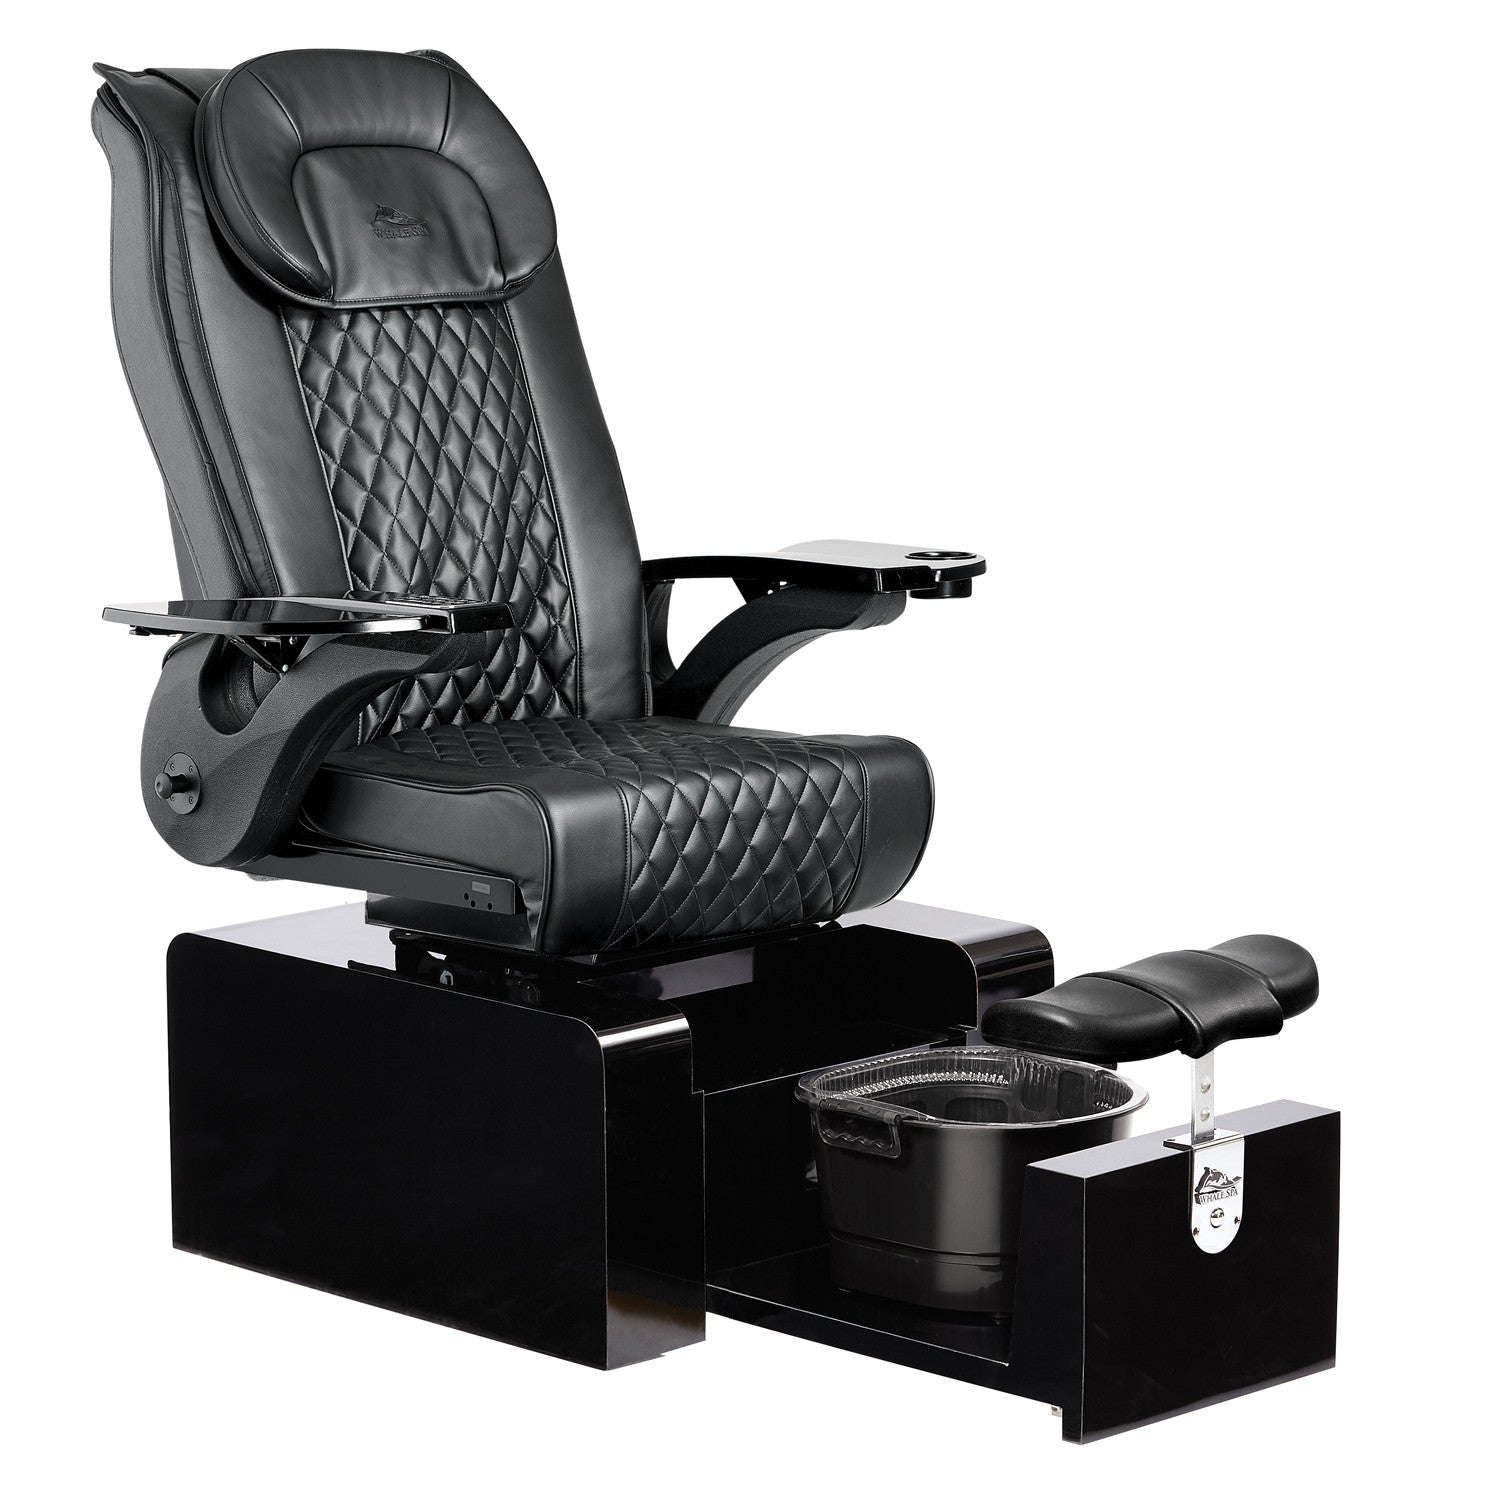 Whale Spa Whale Spa Pure - Portable No Plumbing Portable Spa & Pedicure Chair with Free Trolley & Tech Stool Pedicure Chair - ChairsThatGive